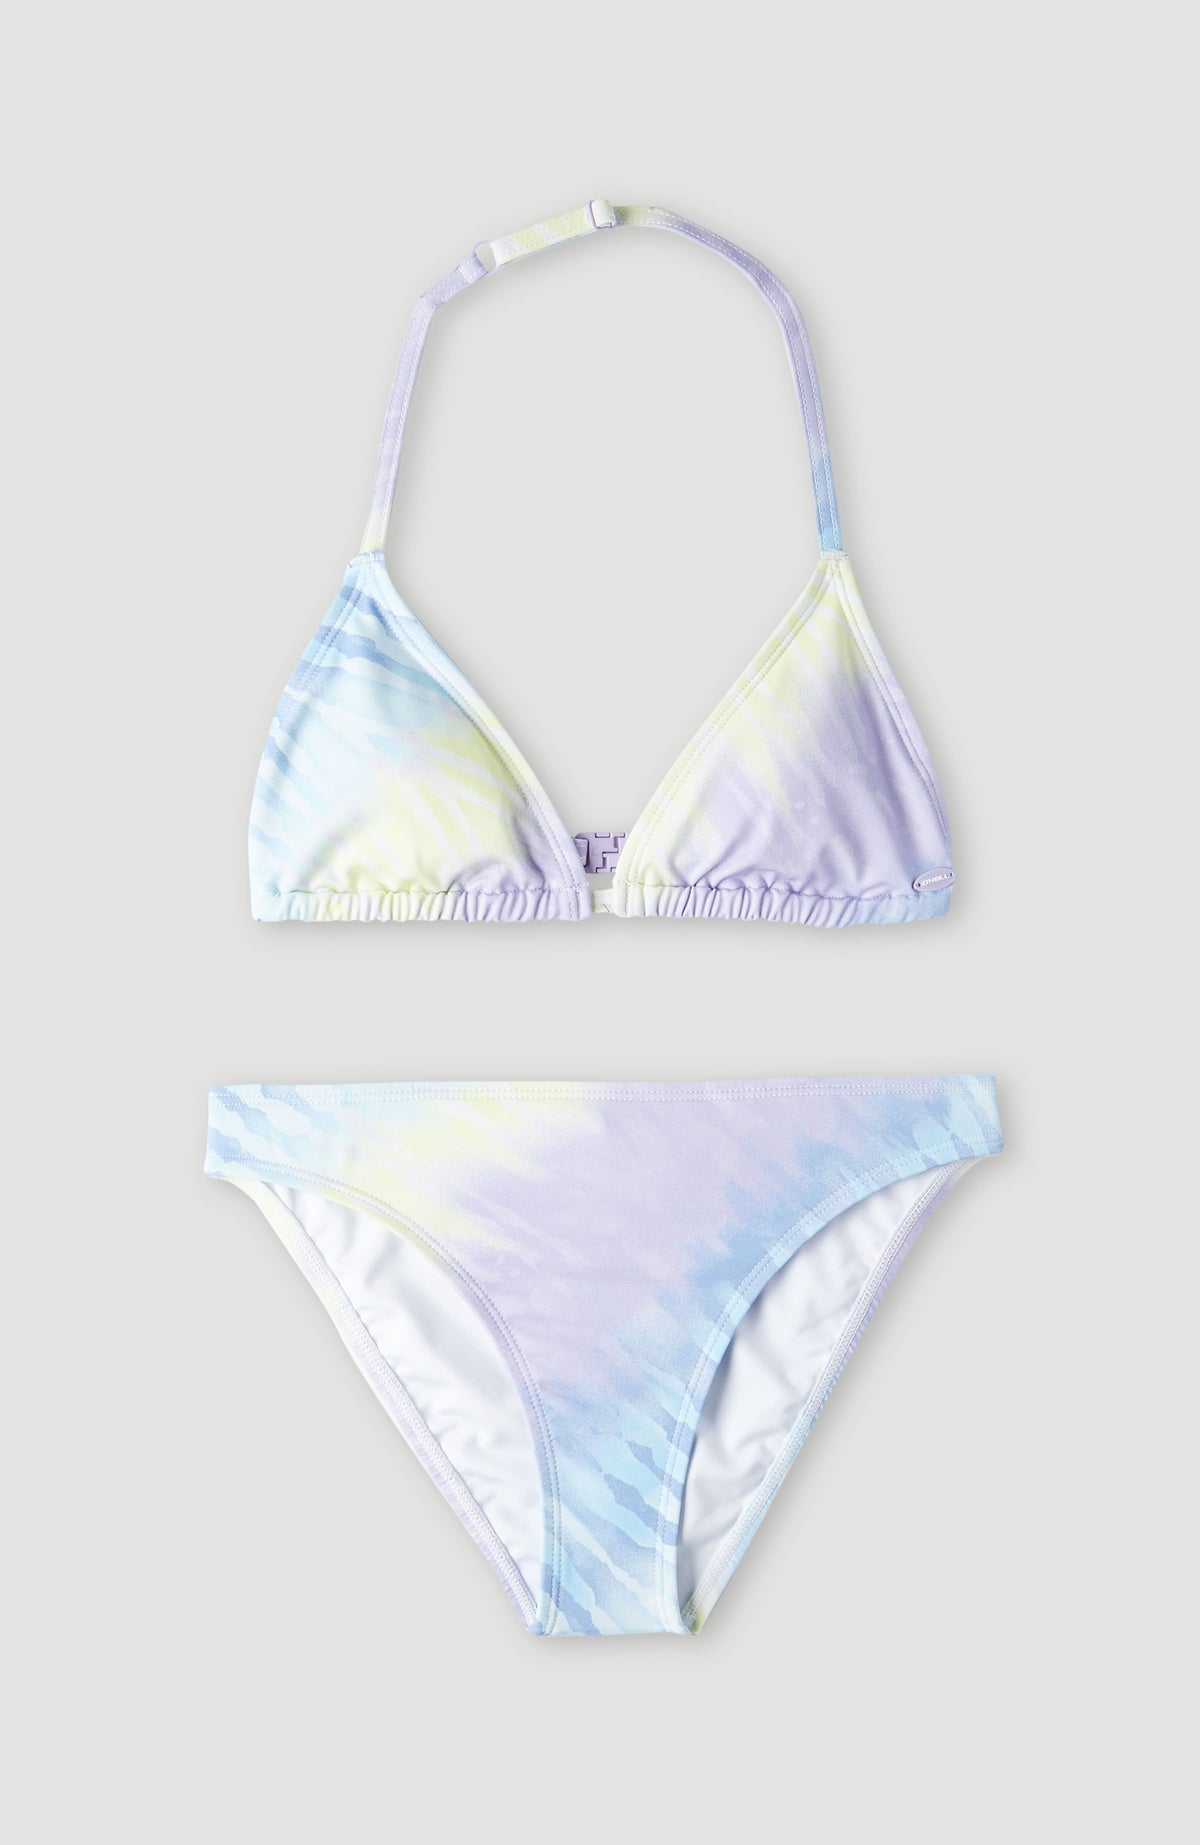 New Balearic Blue Online Now  White Sand And Blue Bikinis